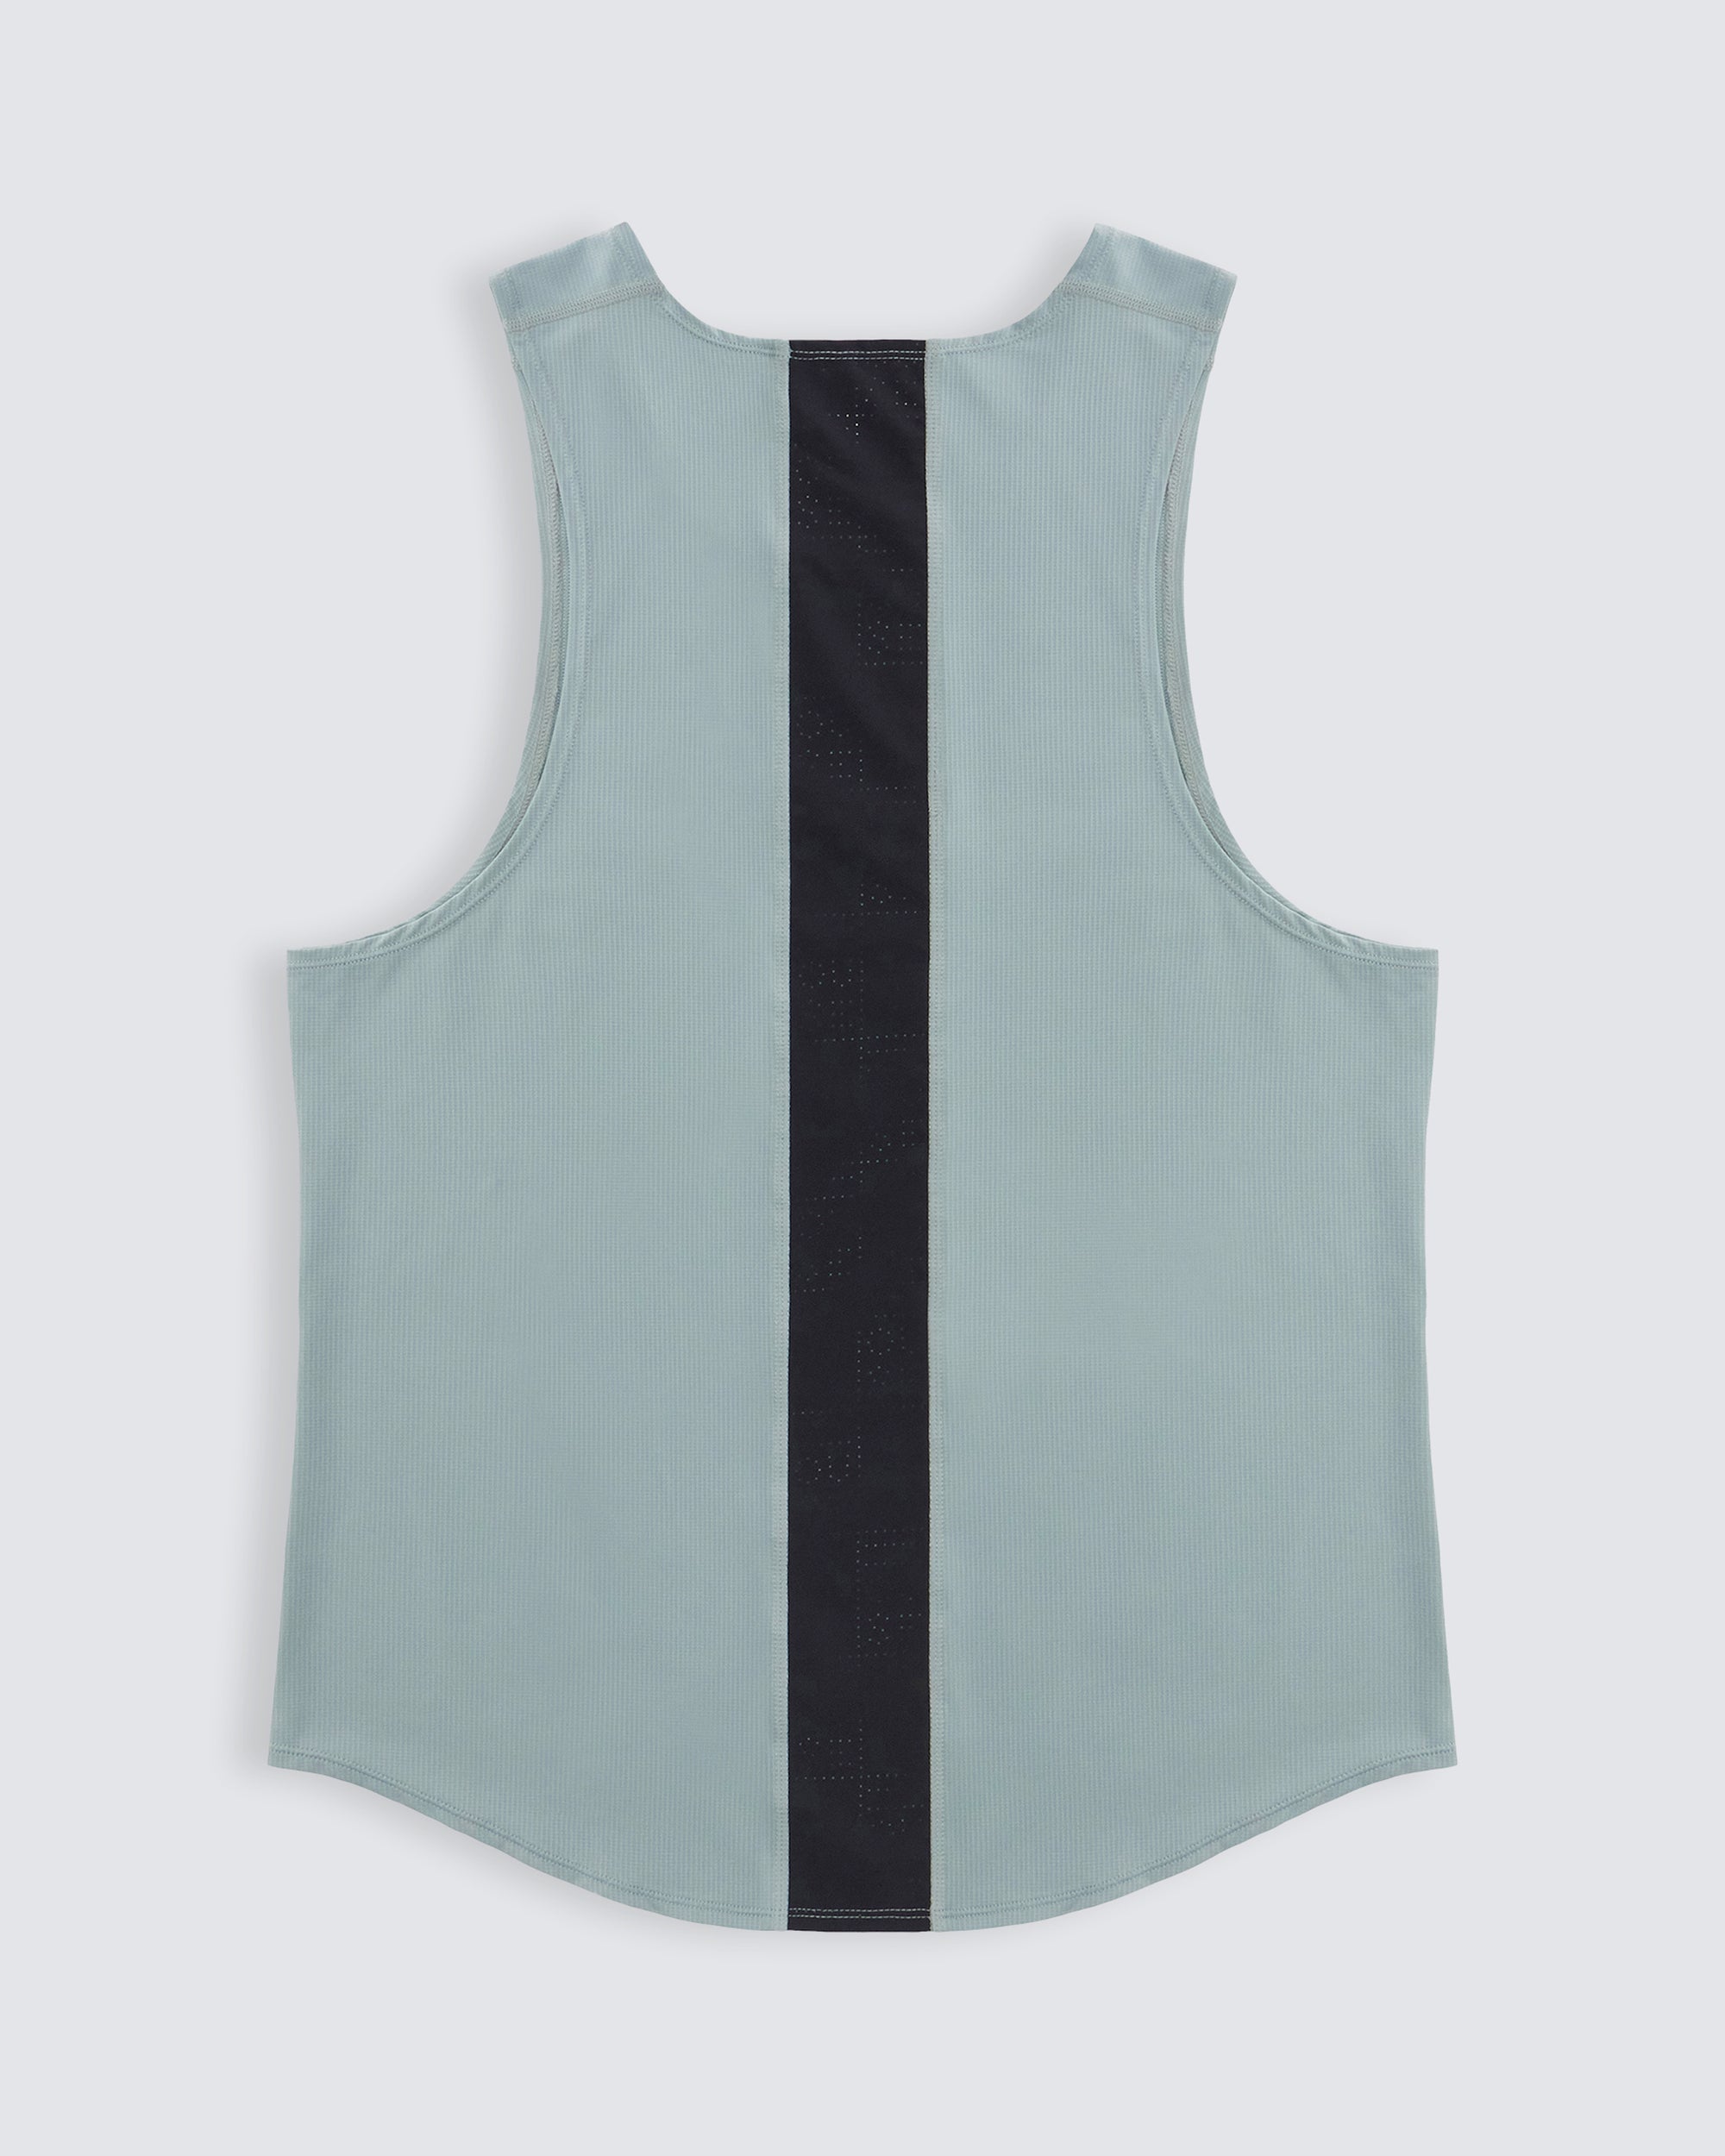 Perforated Athletic Tank - Sea Green